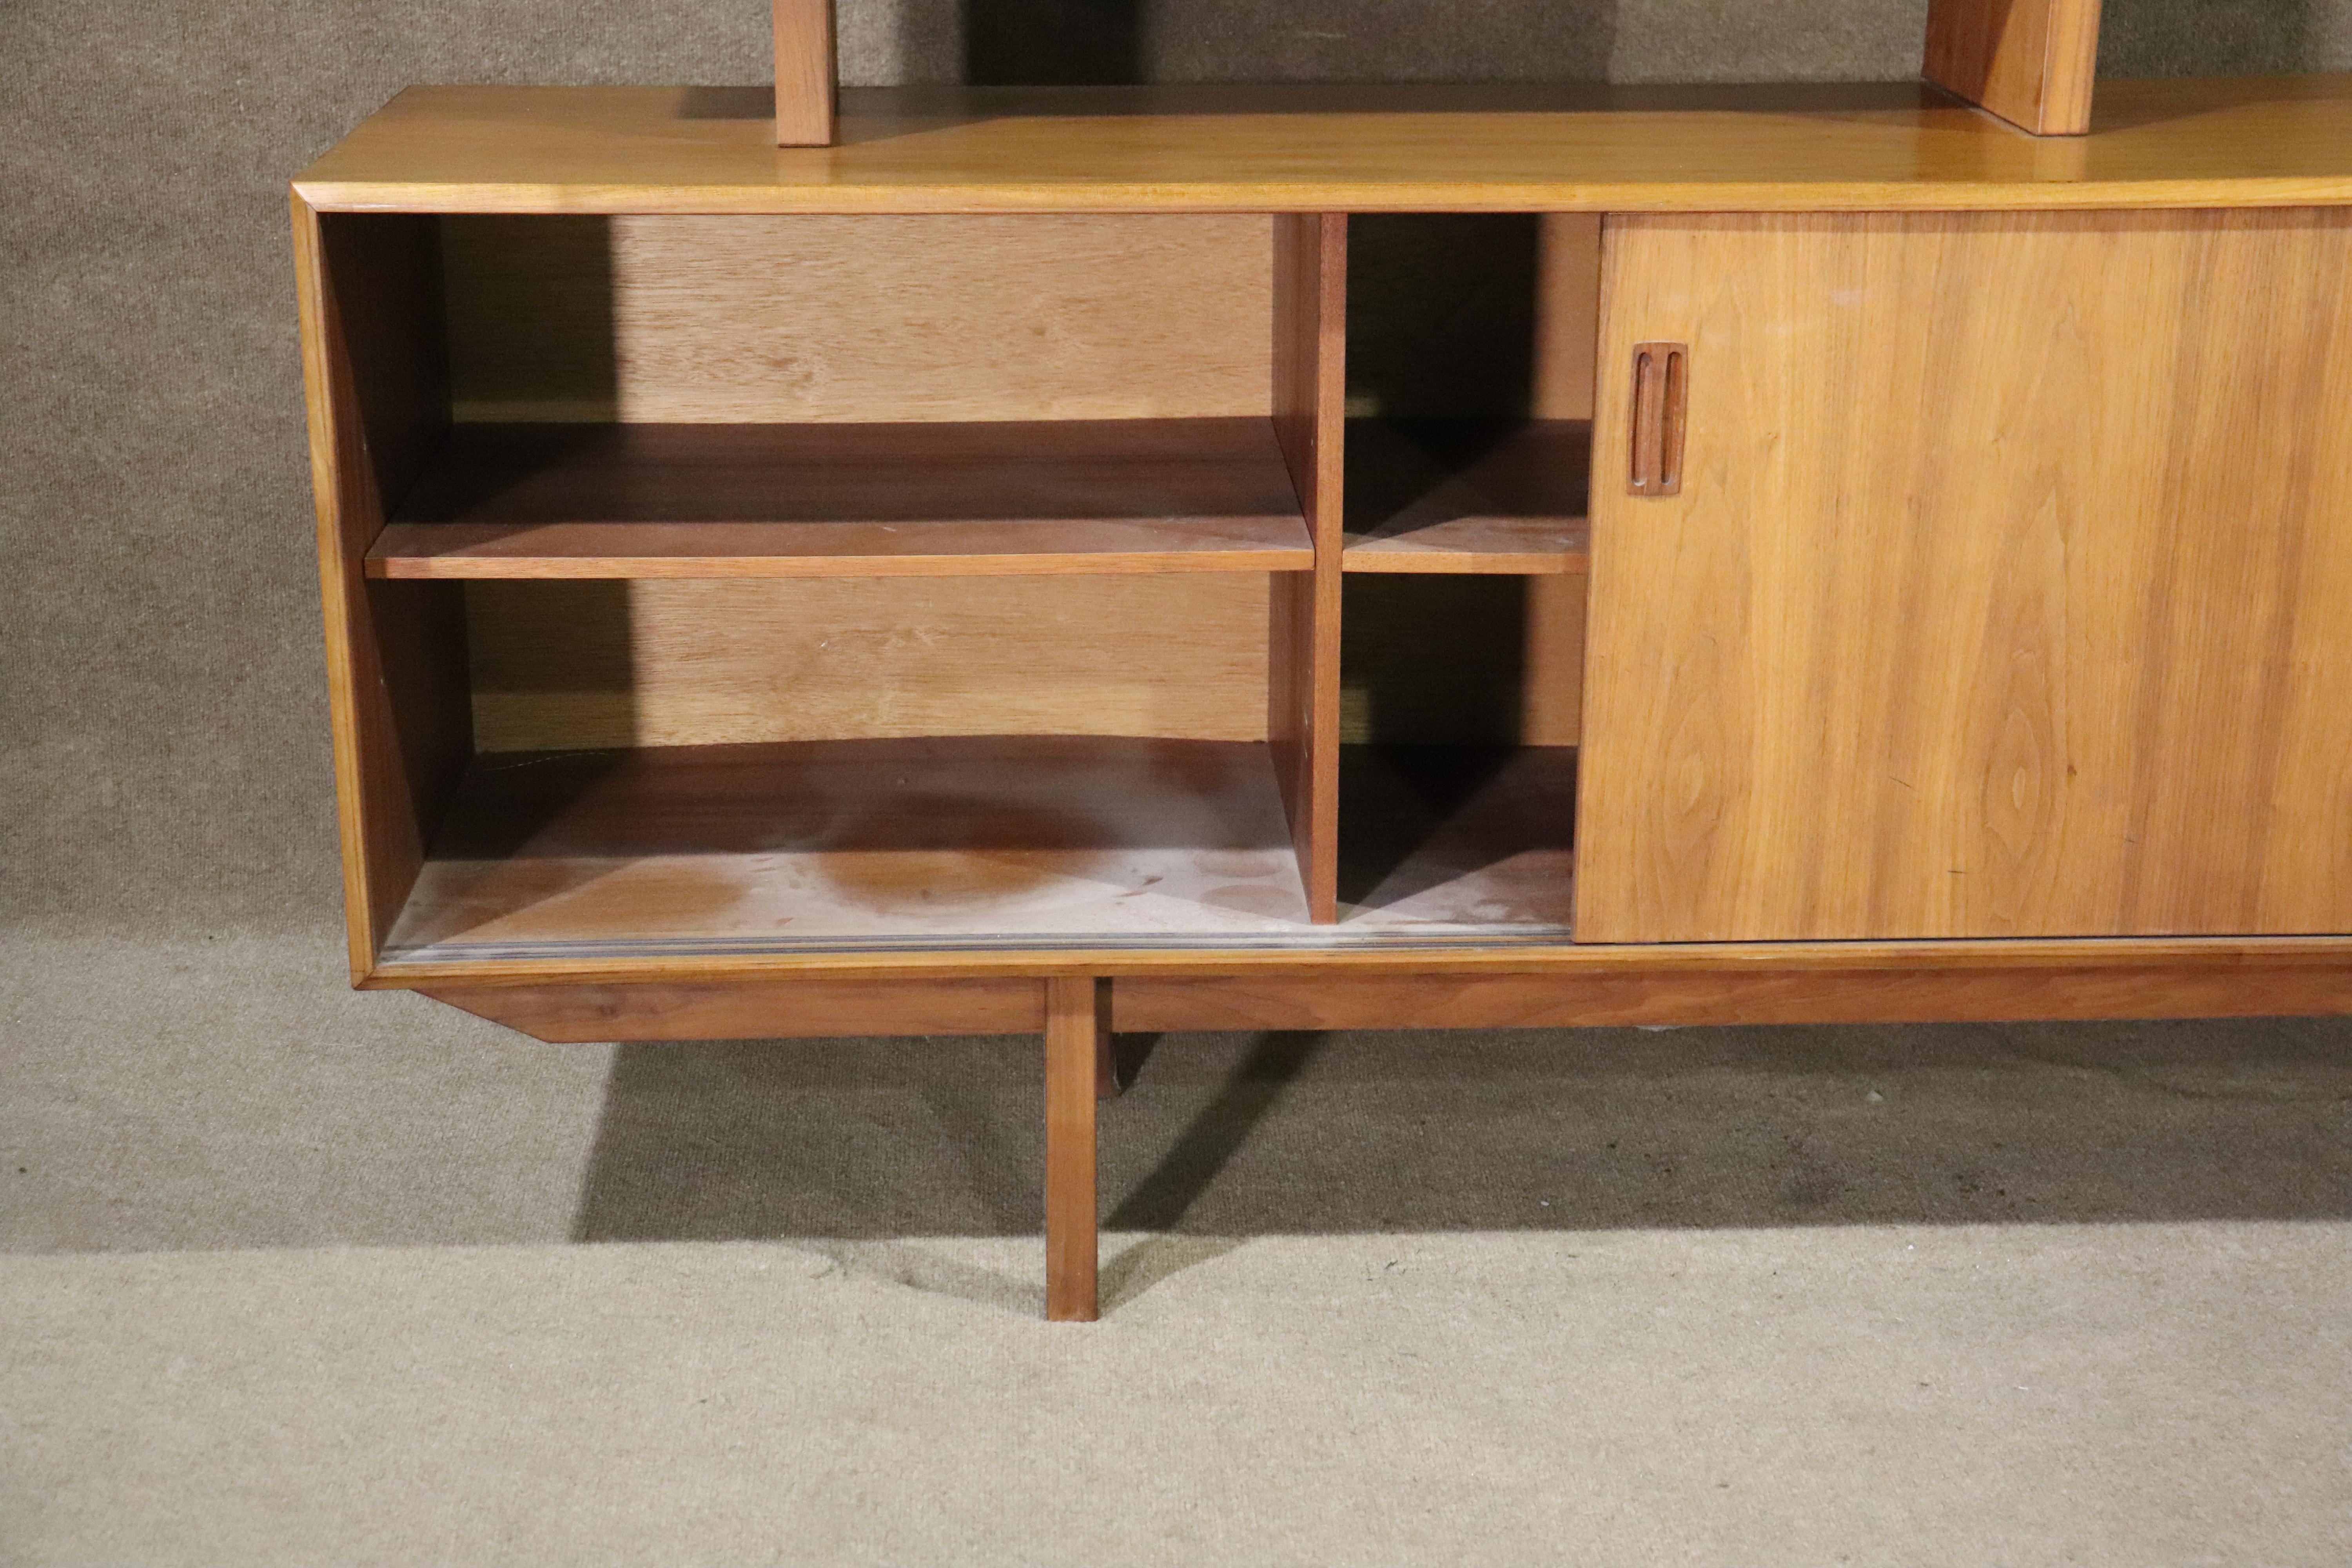 Mid-century modern sideboard with sliding doors. Danish made with teak grain. Three cabinets with removable shelves. Great for living room storage.
Please confirm location NY or NJ